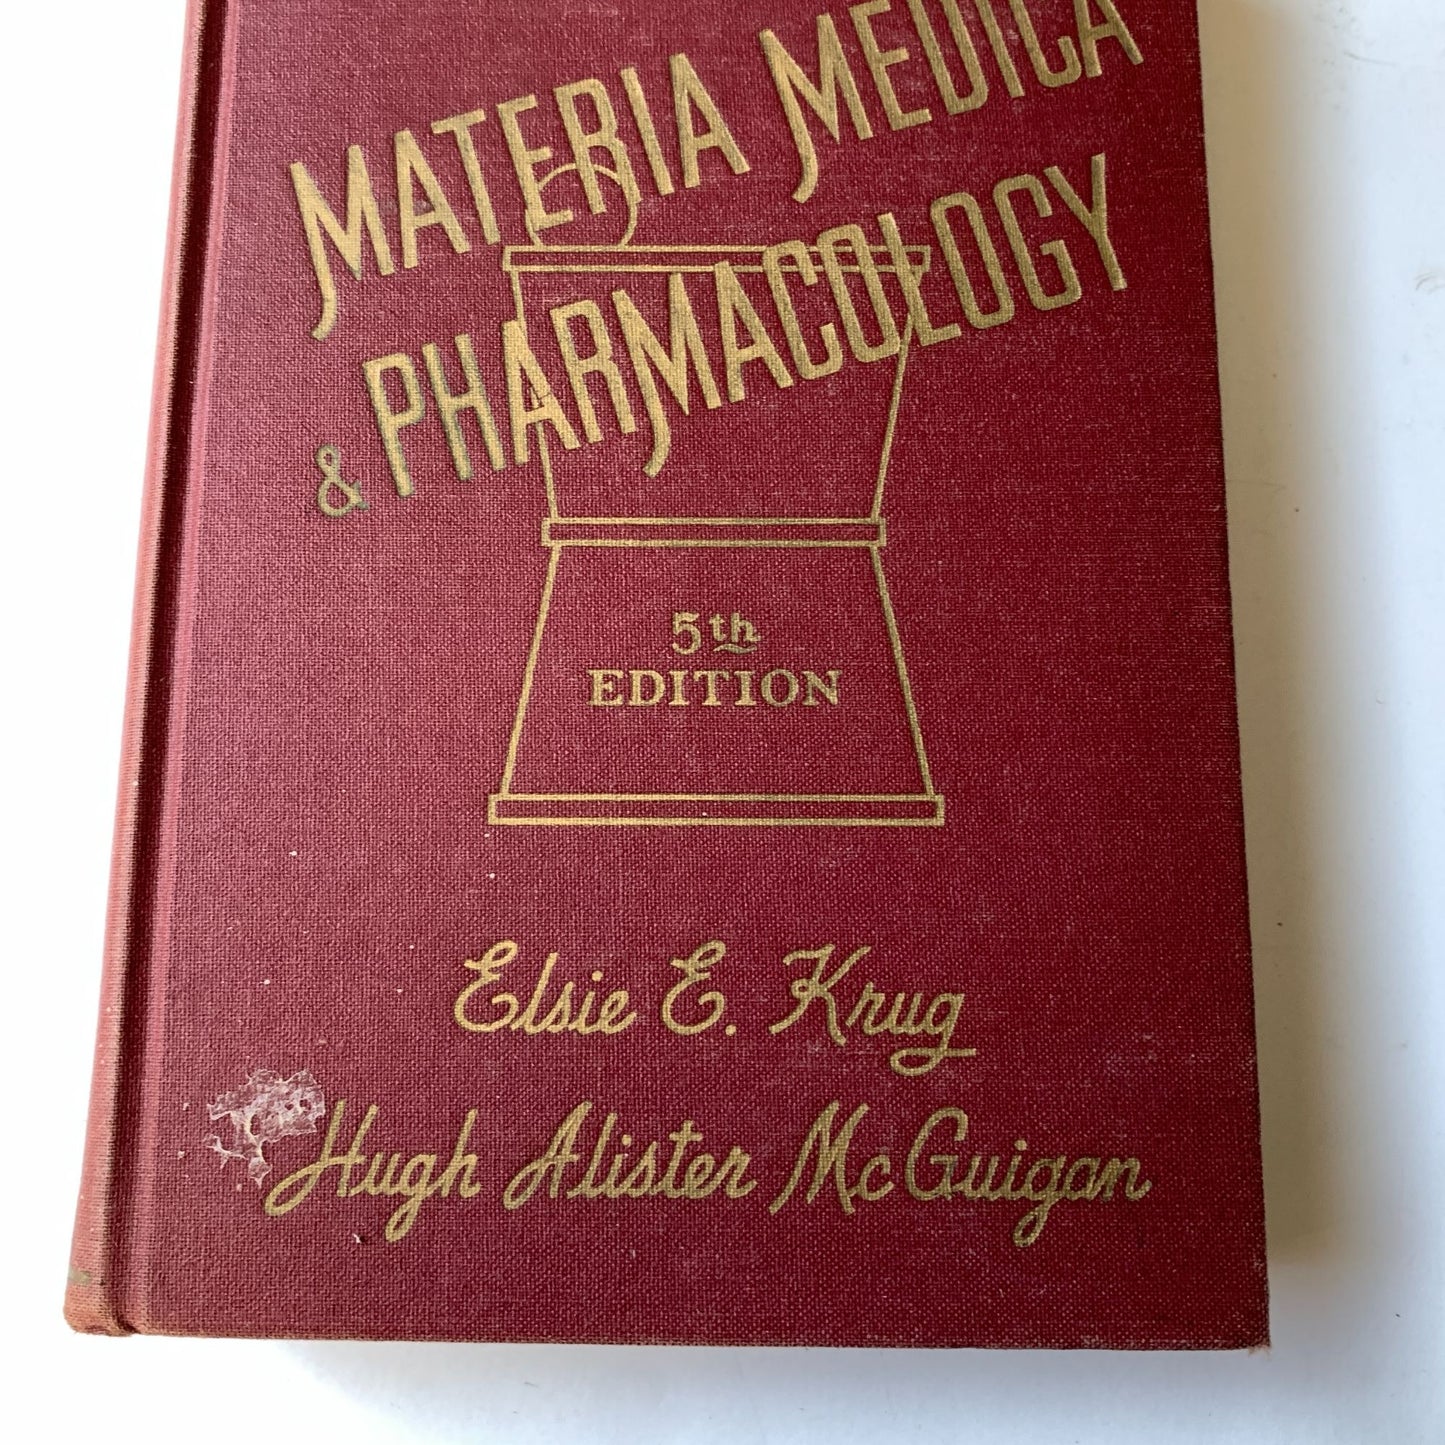 Introduction to Materia Medica & Pharmacology Book 1948